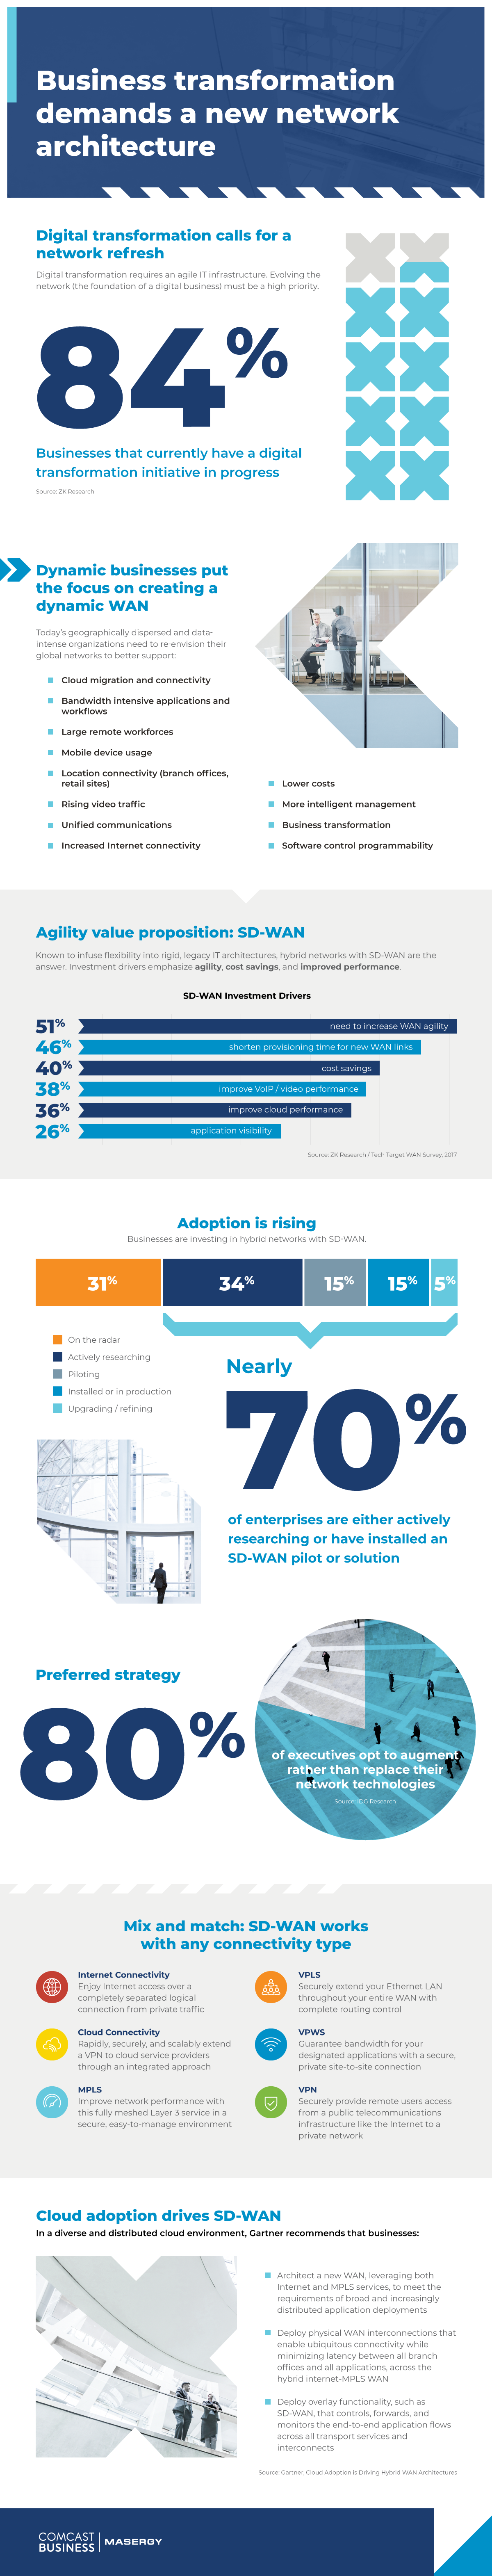 New Network Architecture for Business Transformations Infographic